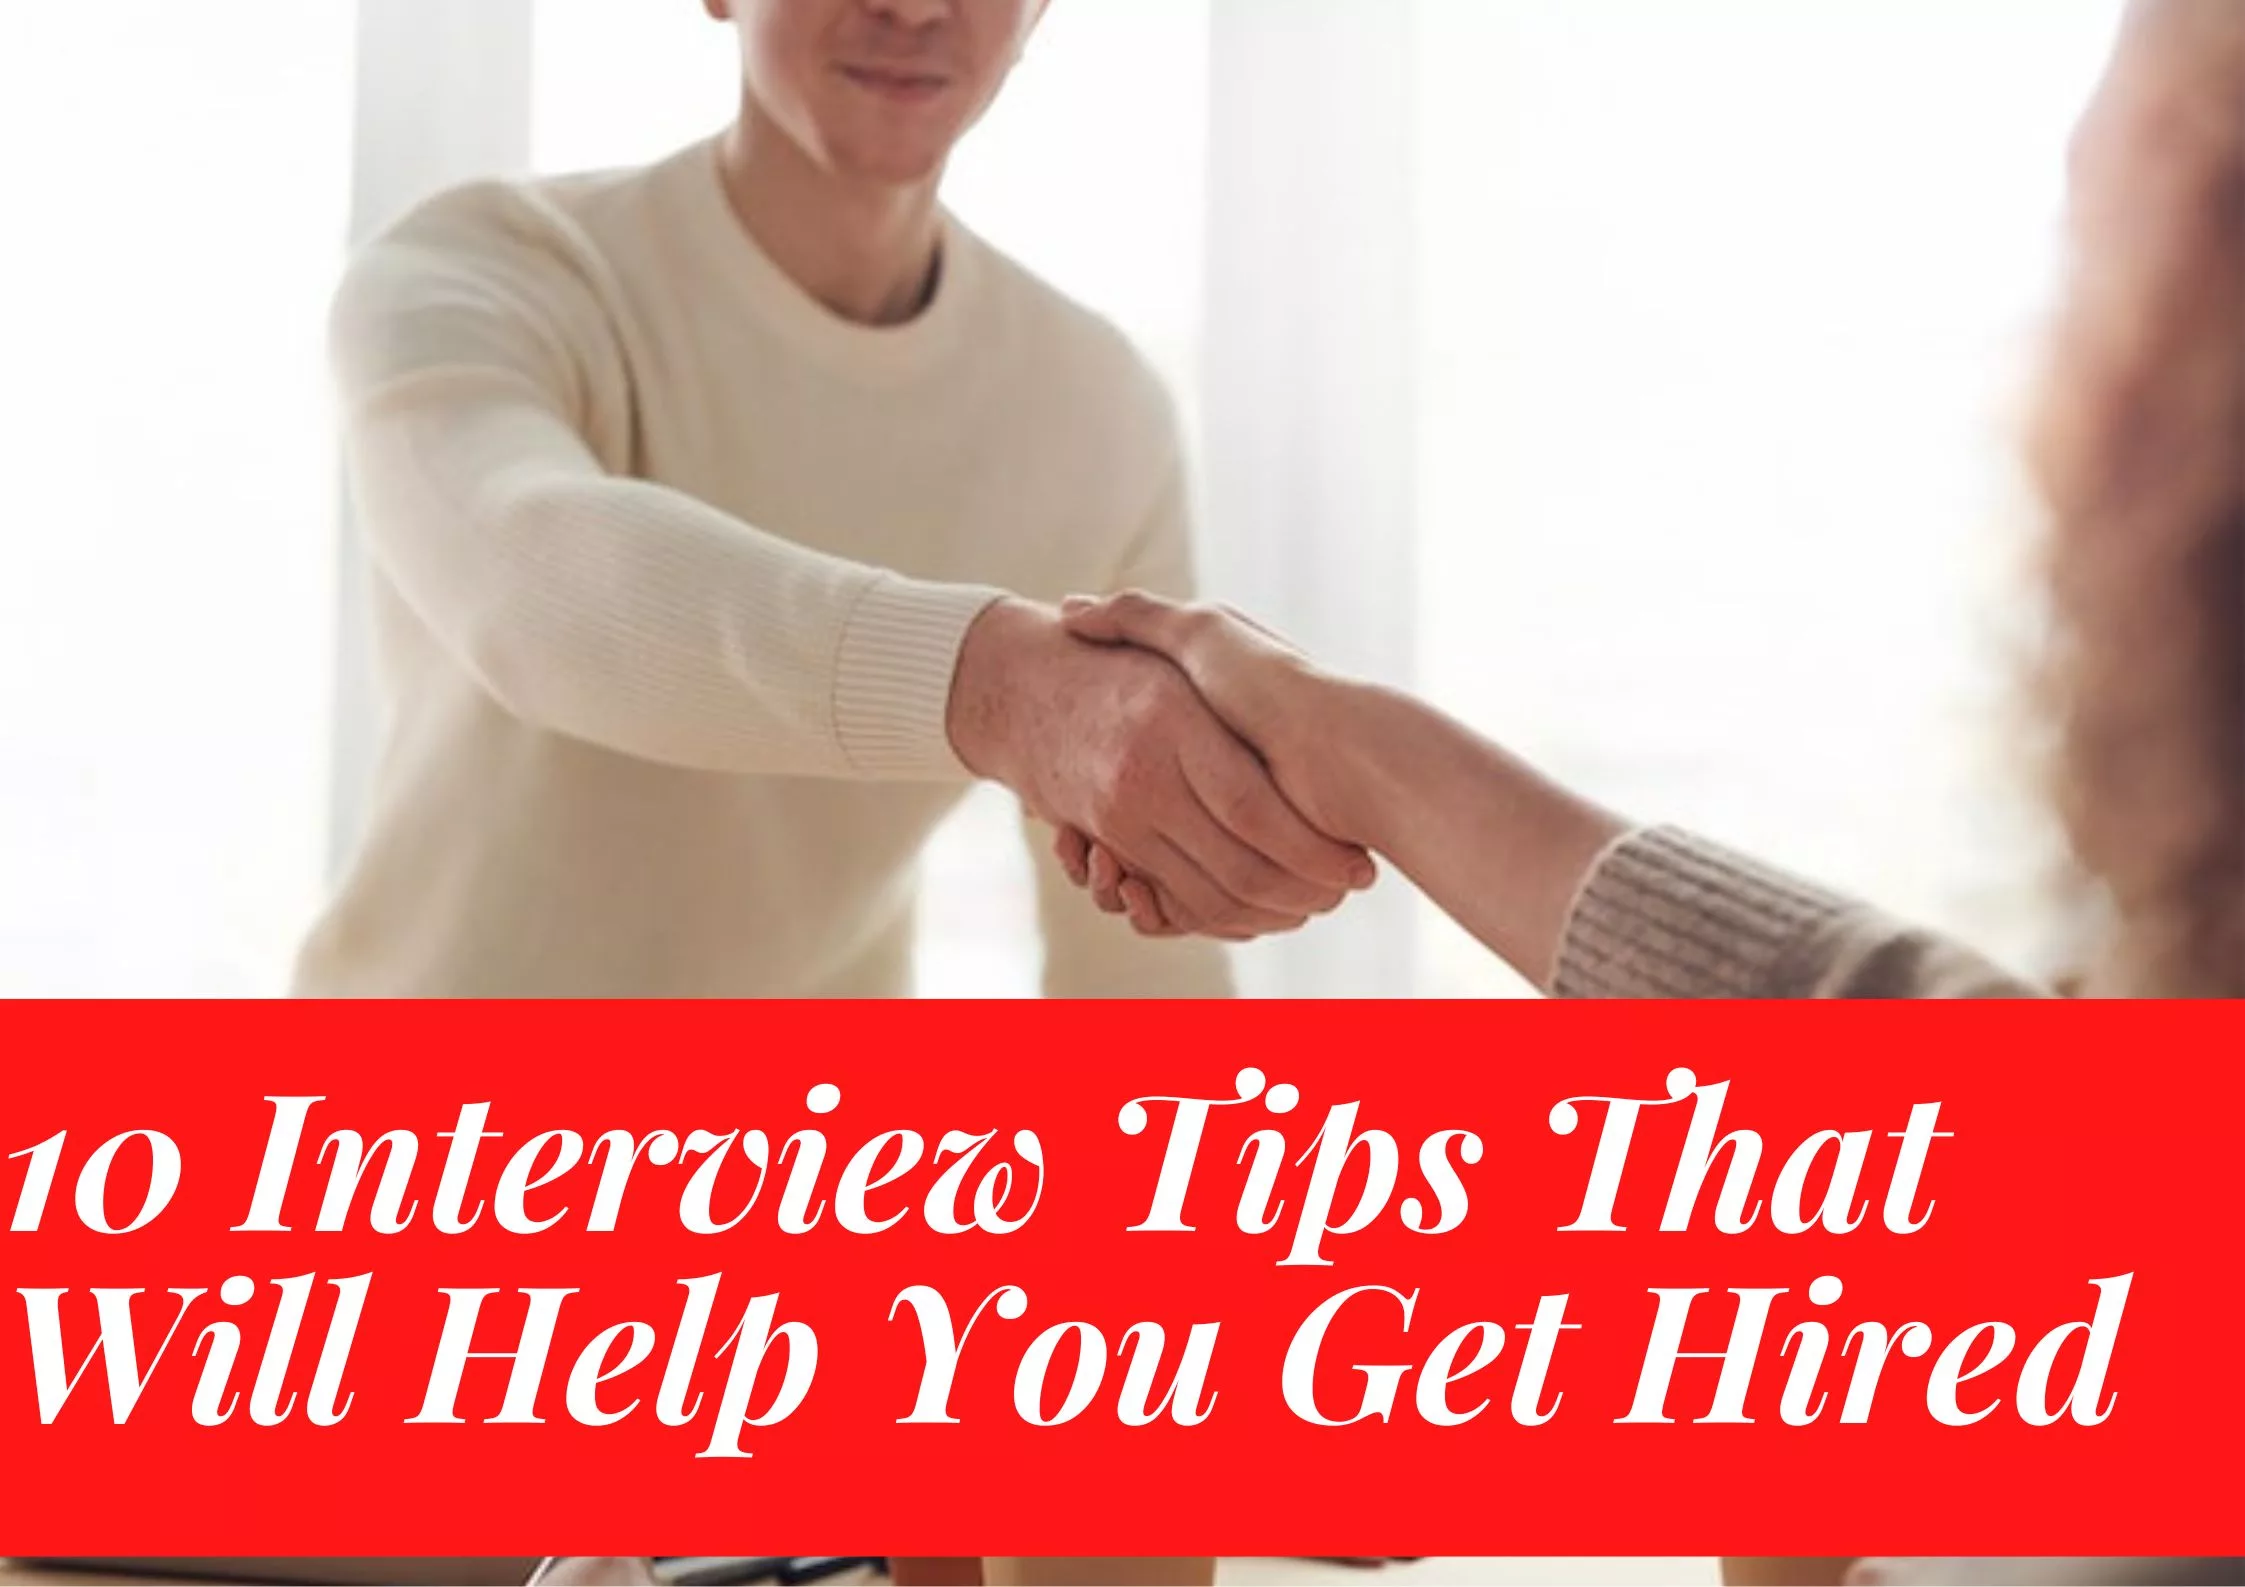 10 Interview Tips That Will Help You Get Hired